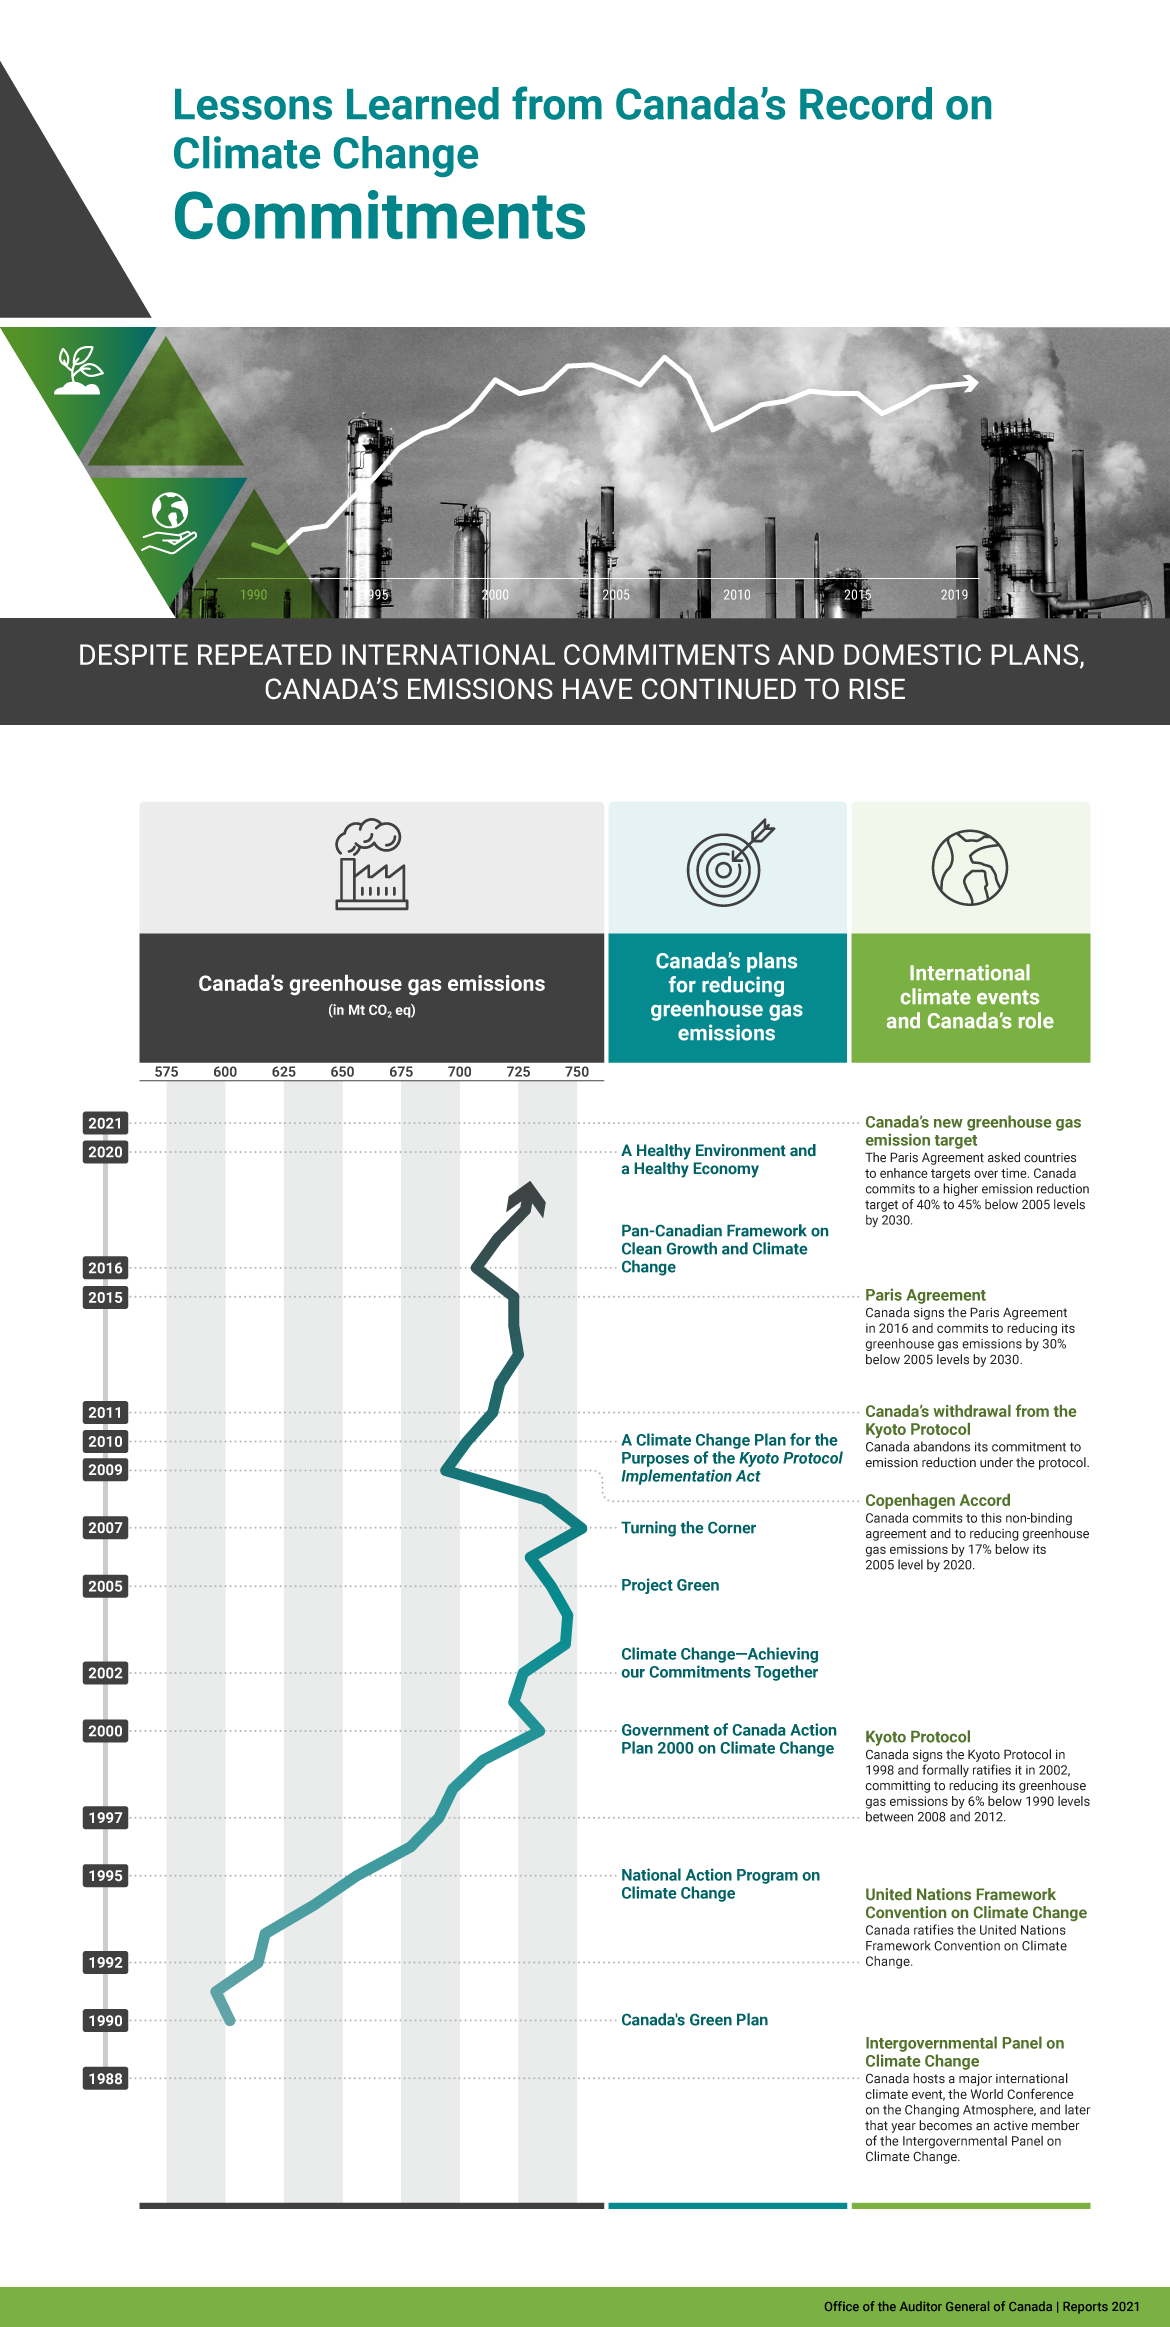 This infographic shows Canada’s greenhouse gas emissions in megatonnes of carbon dioxide equivalent from 1990 to 2019 and its plans for reducing emissions during that period